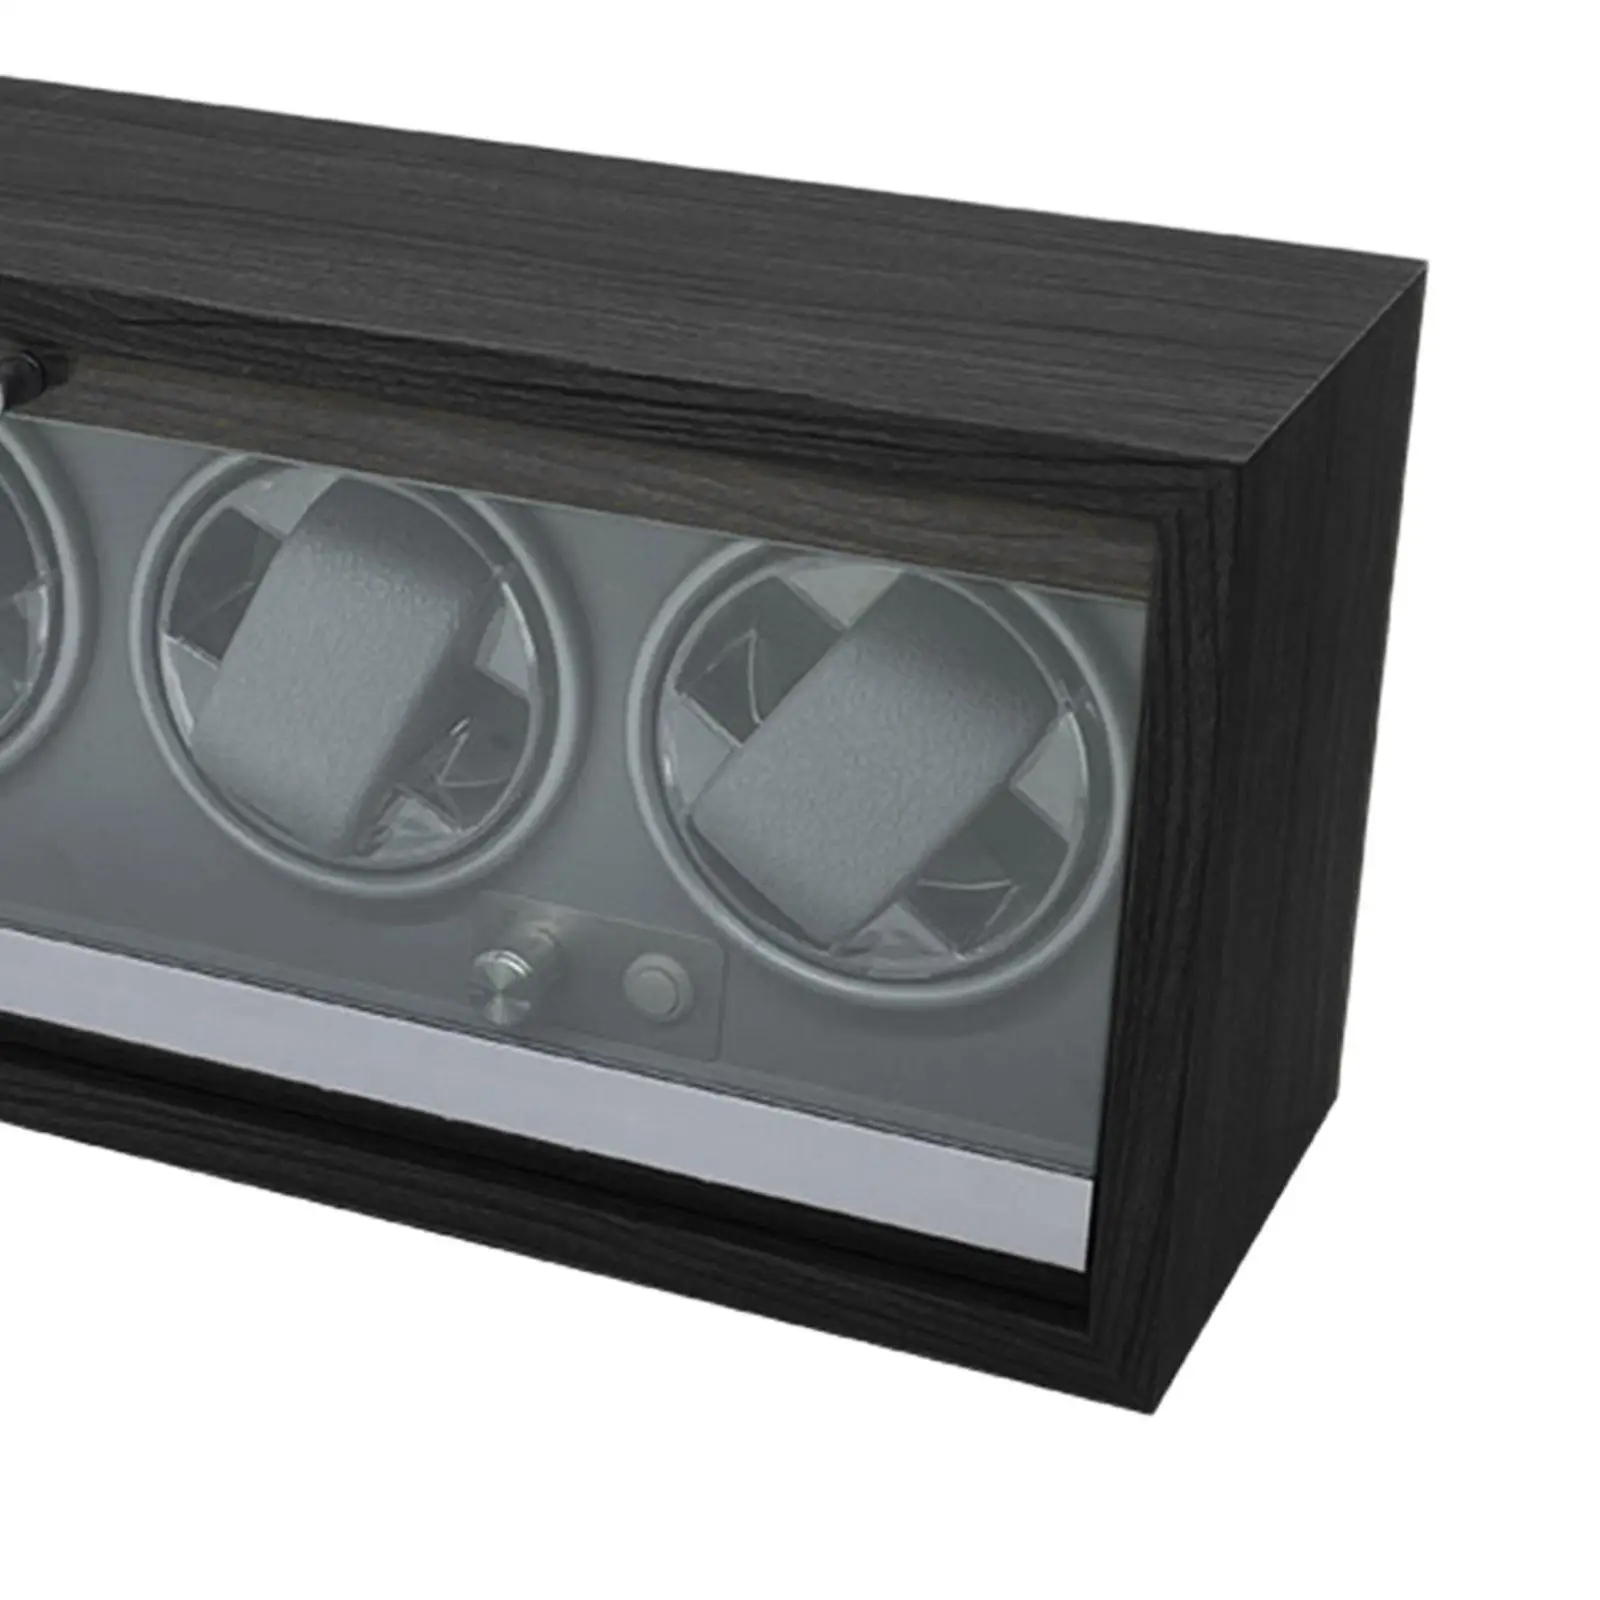 Watch Winder Box Mechanical Rotating Box Watch Display Case with Ambient Light Luxury Wooden Watch Box for Mechanical Watches